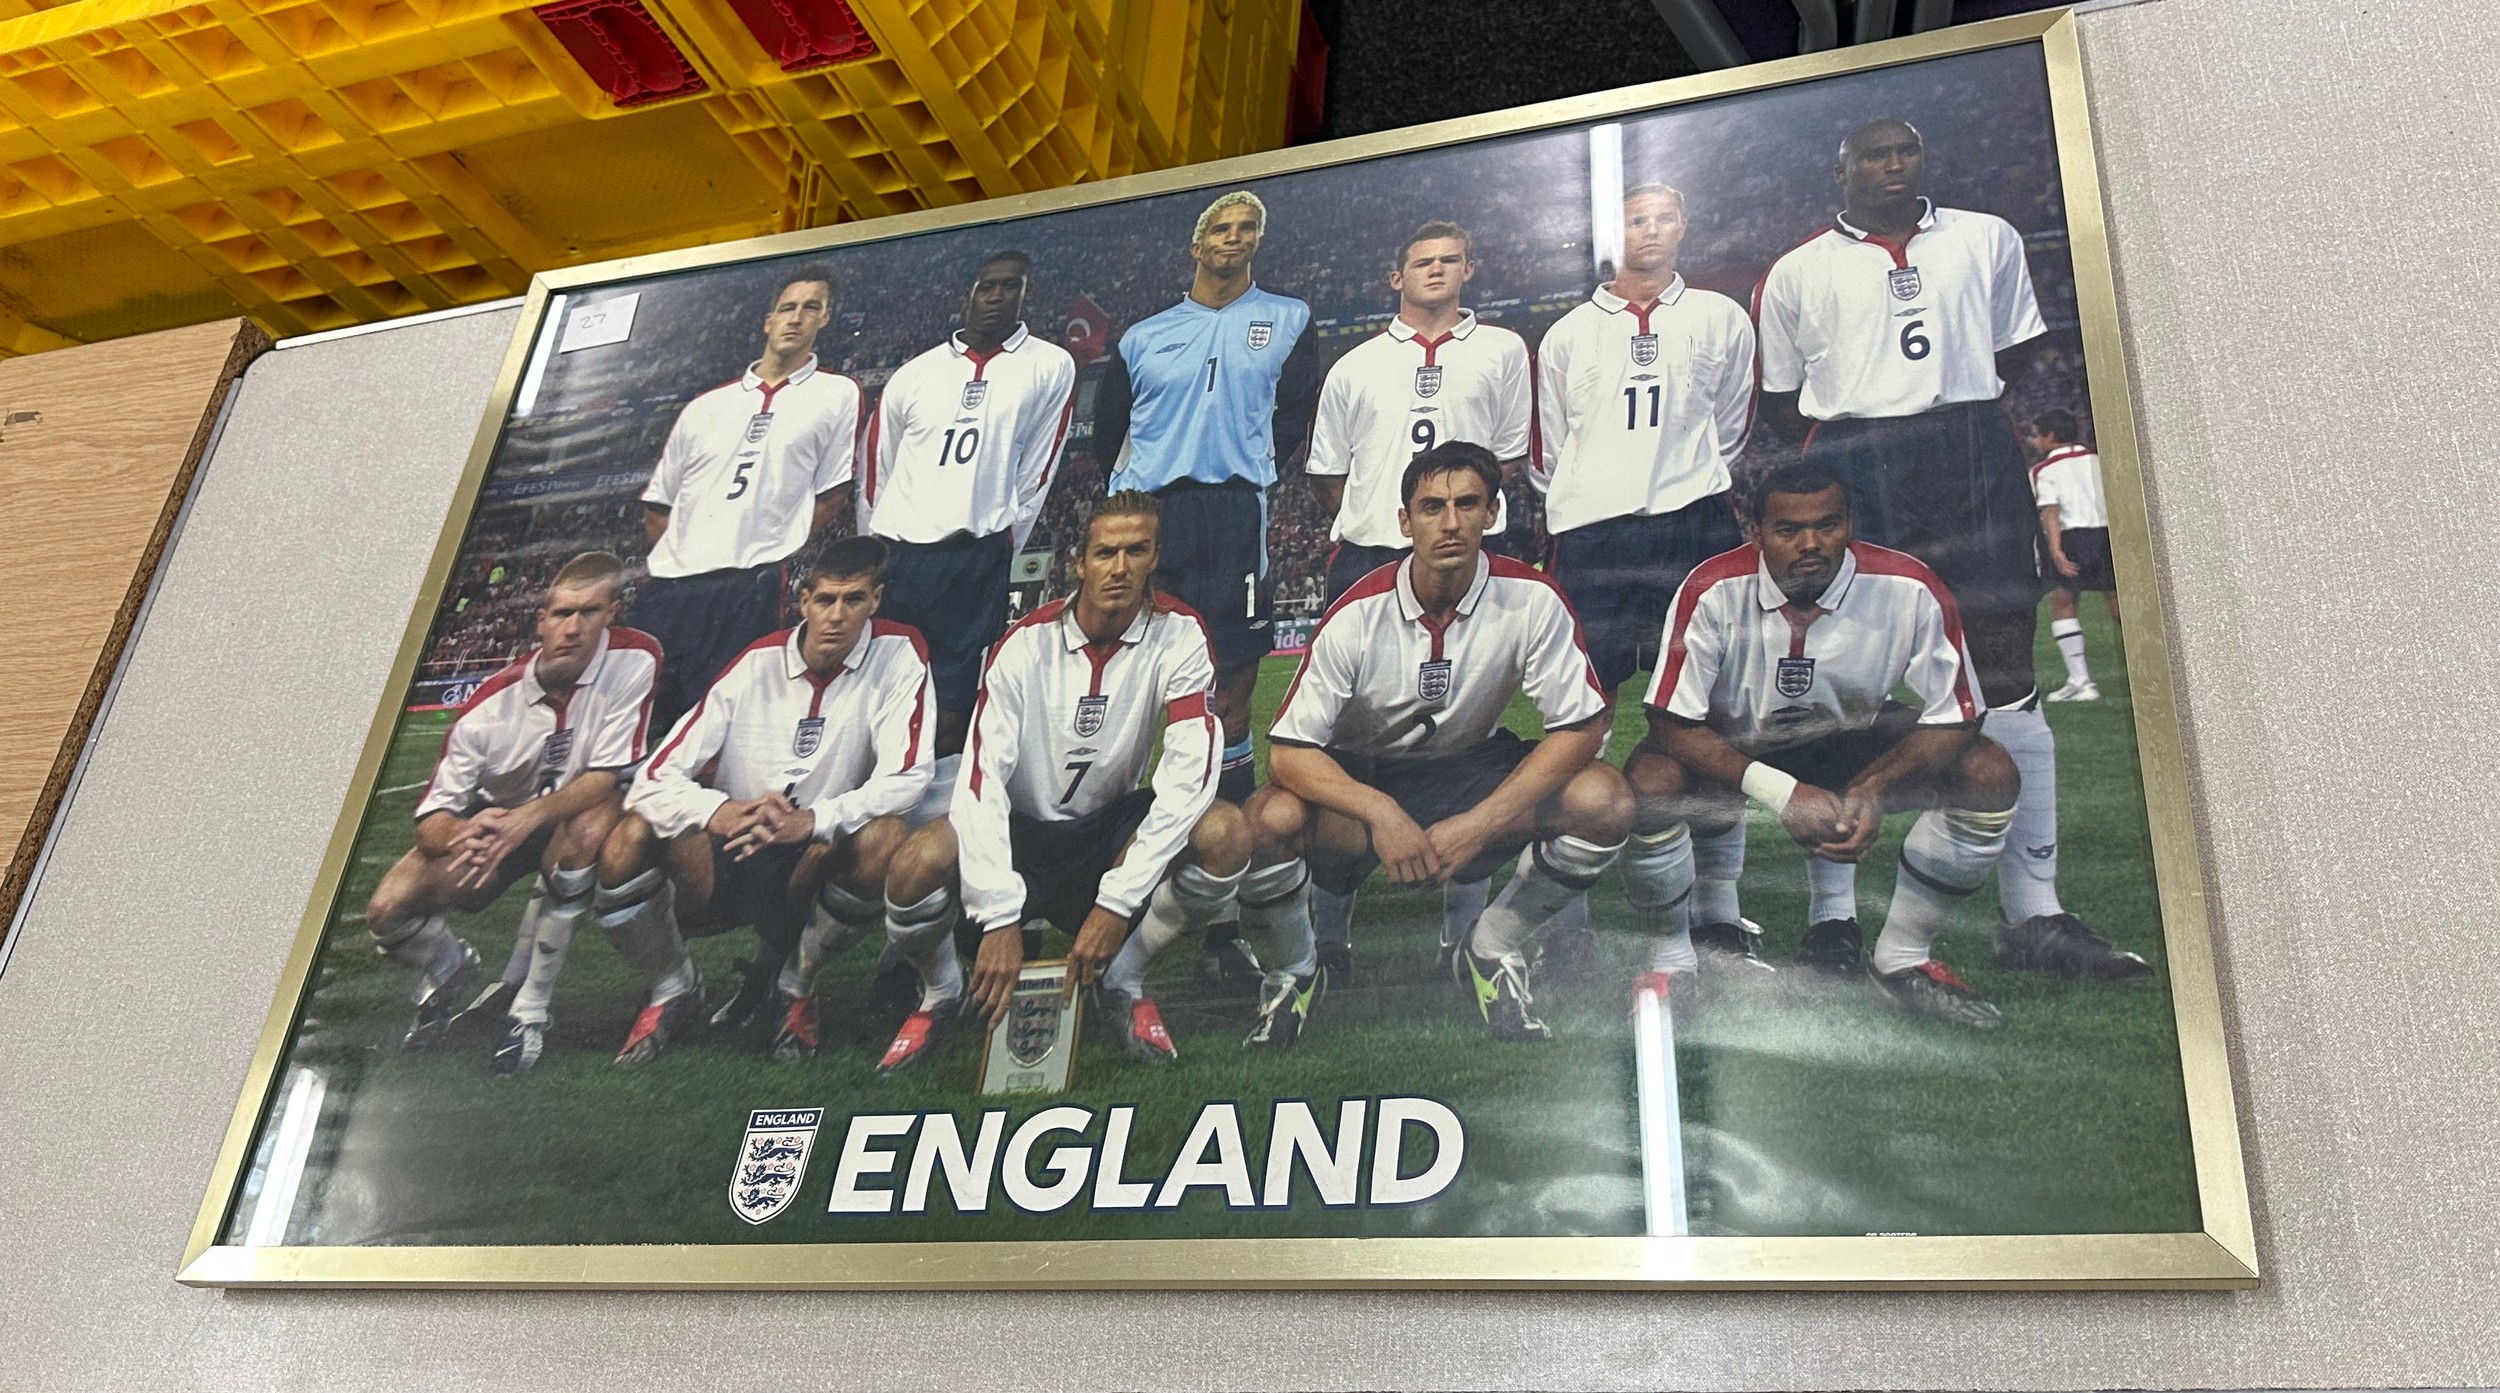 Framed England photo measures approximately 25 x 37 inches - Image 3 of 3